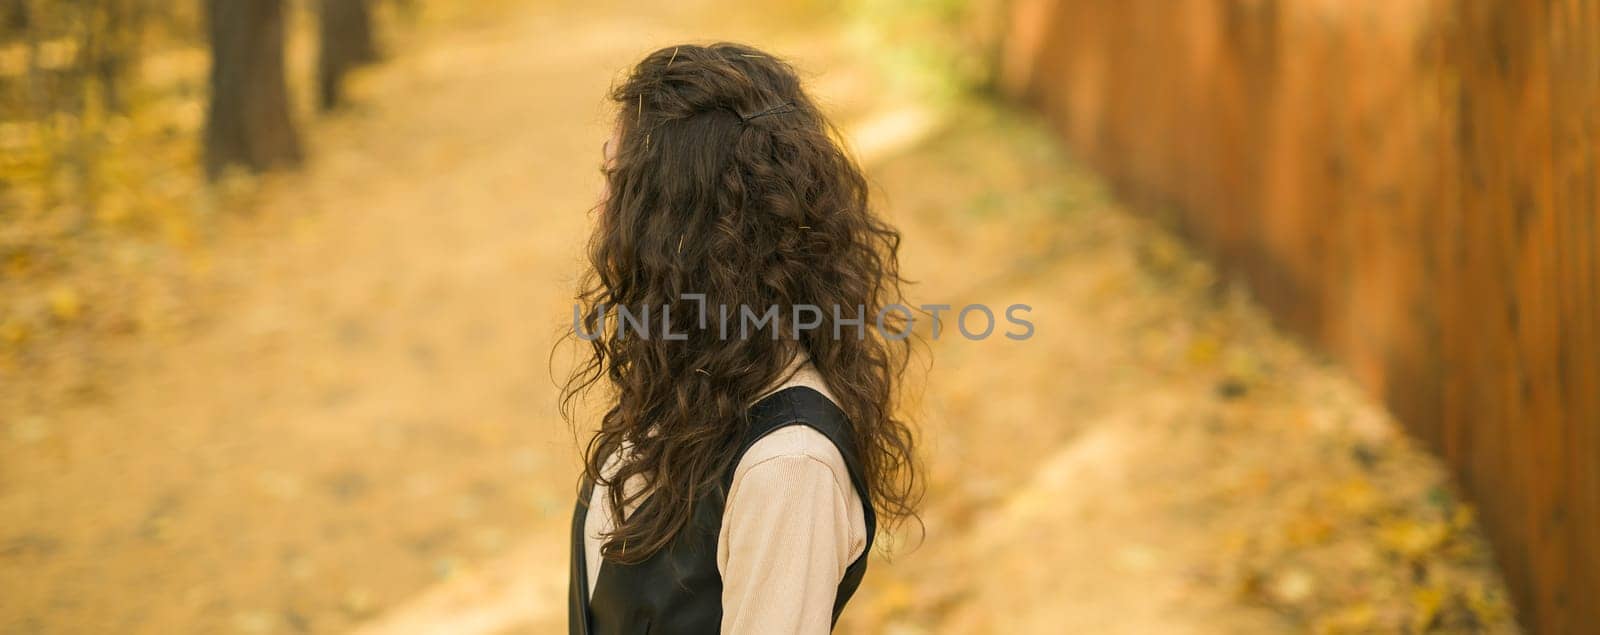 Banner Girl in fall park back view copy space. Woman with long curly hair. Beautiful sunlight in forest. Hair care. Millennial Generation and youth. by Satura86